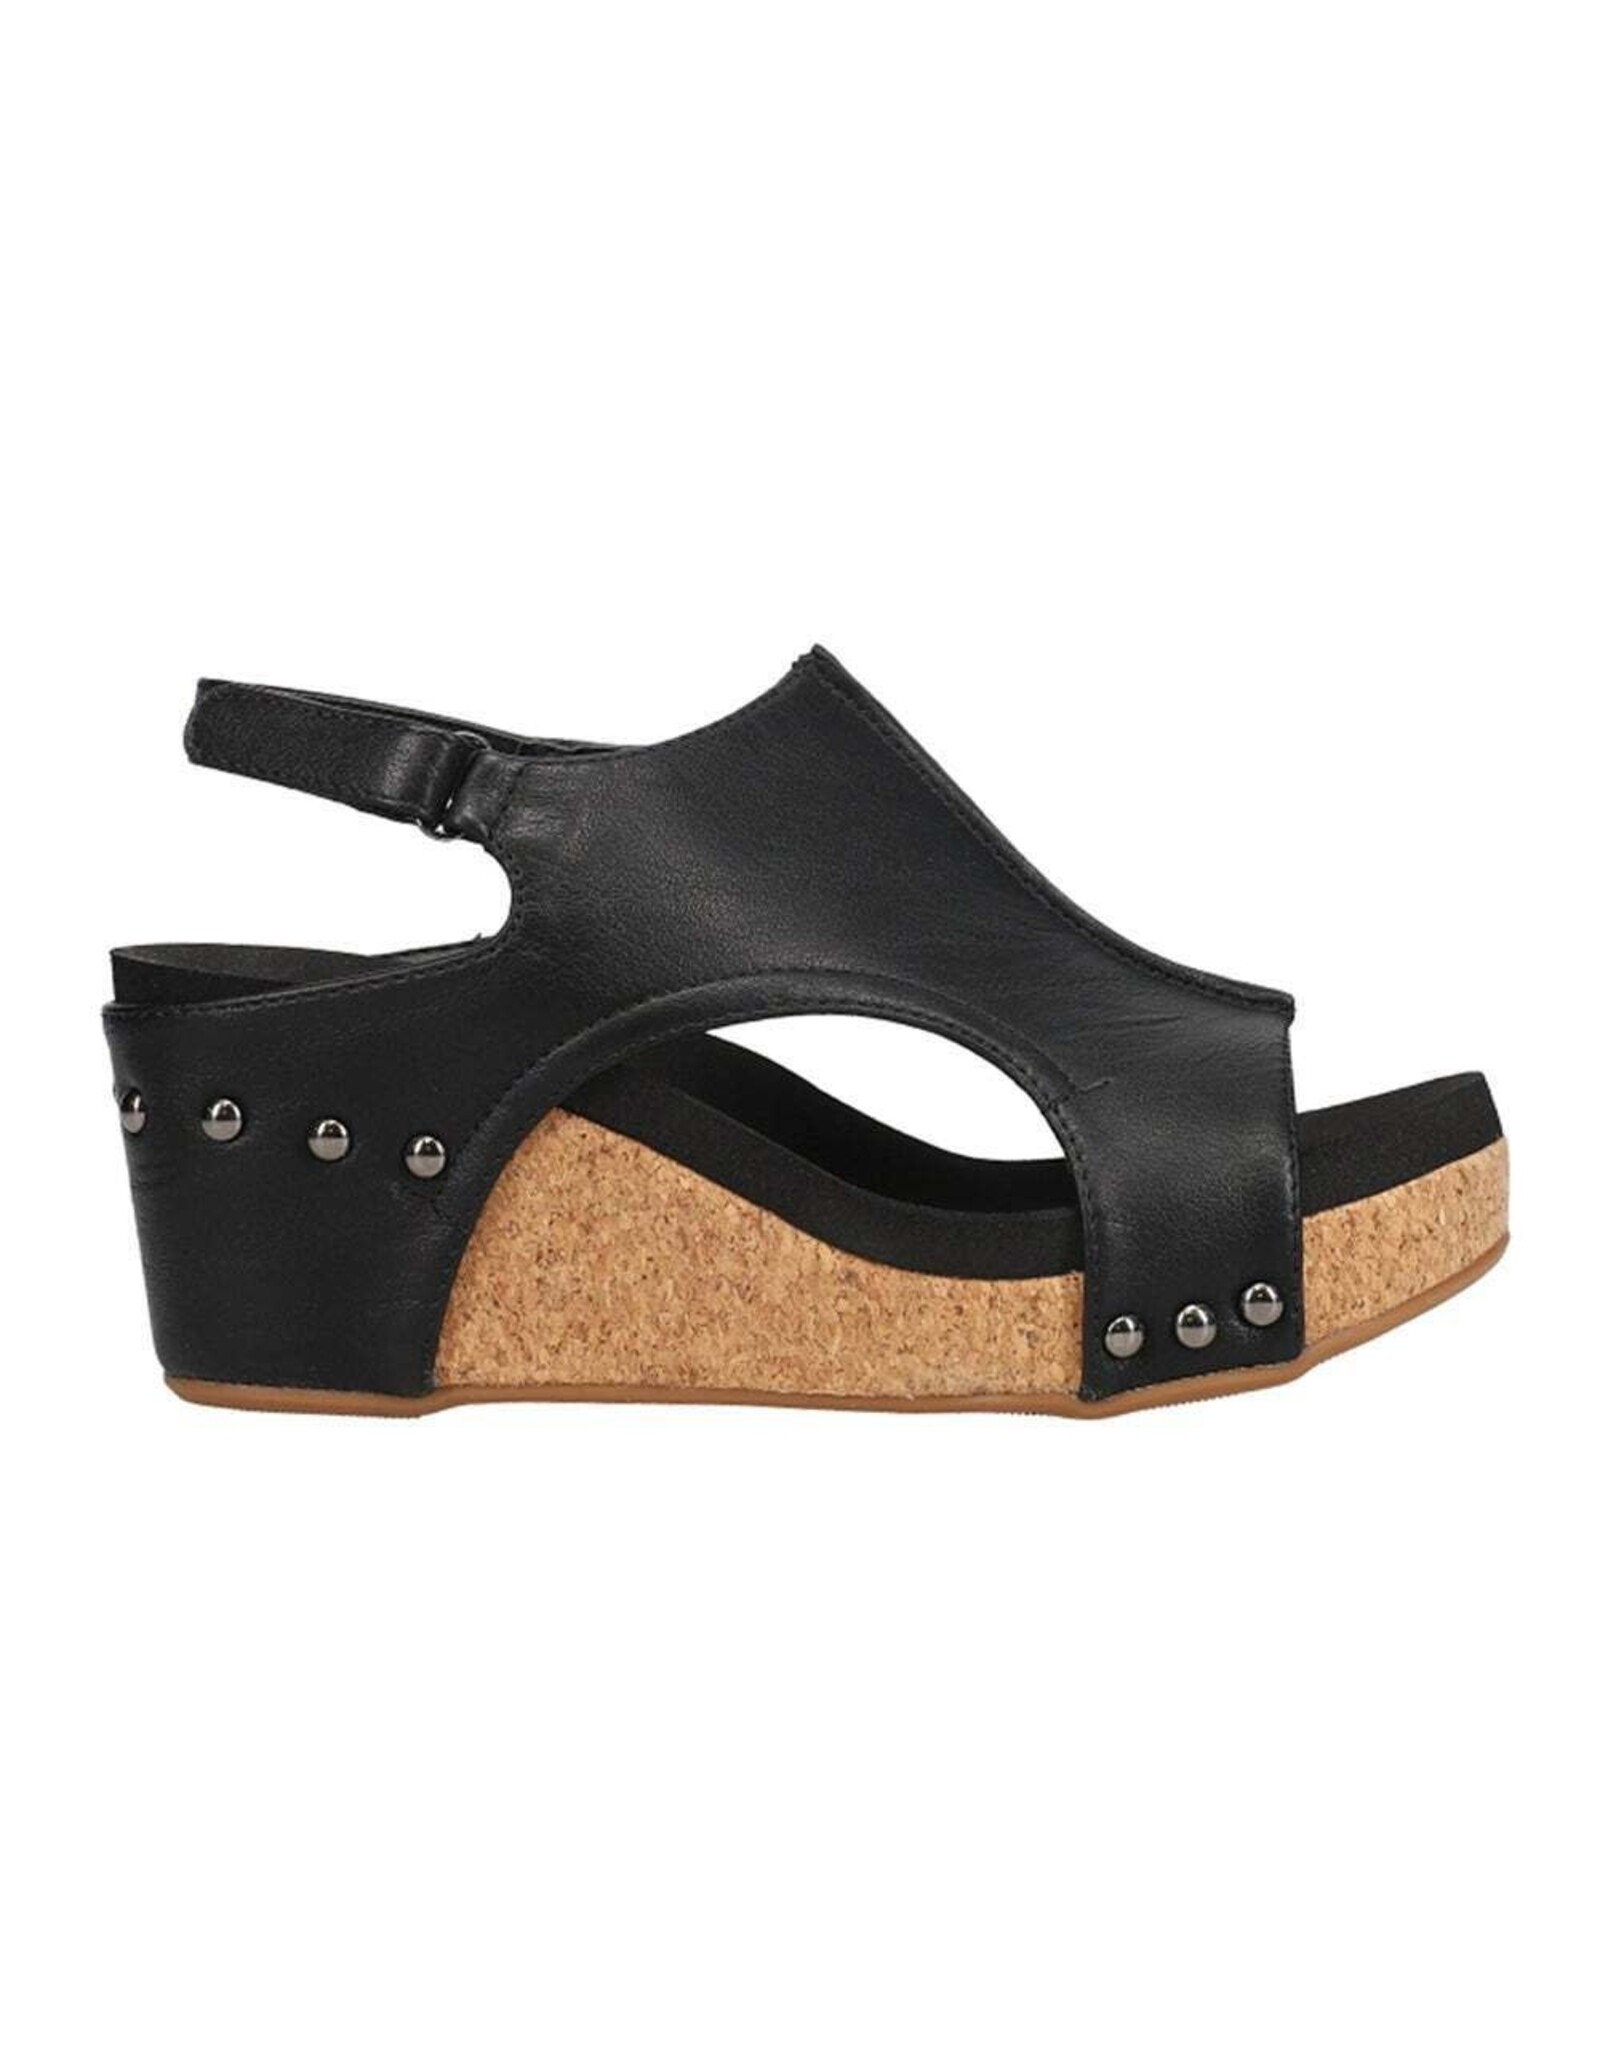 Corky's Corkys Carley Wedge in Black